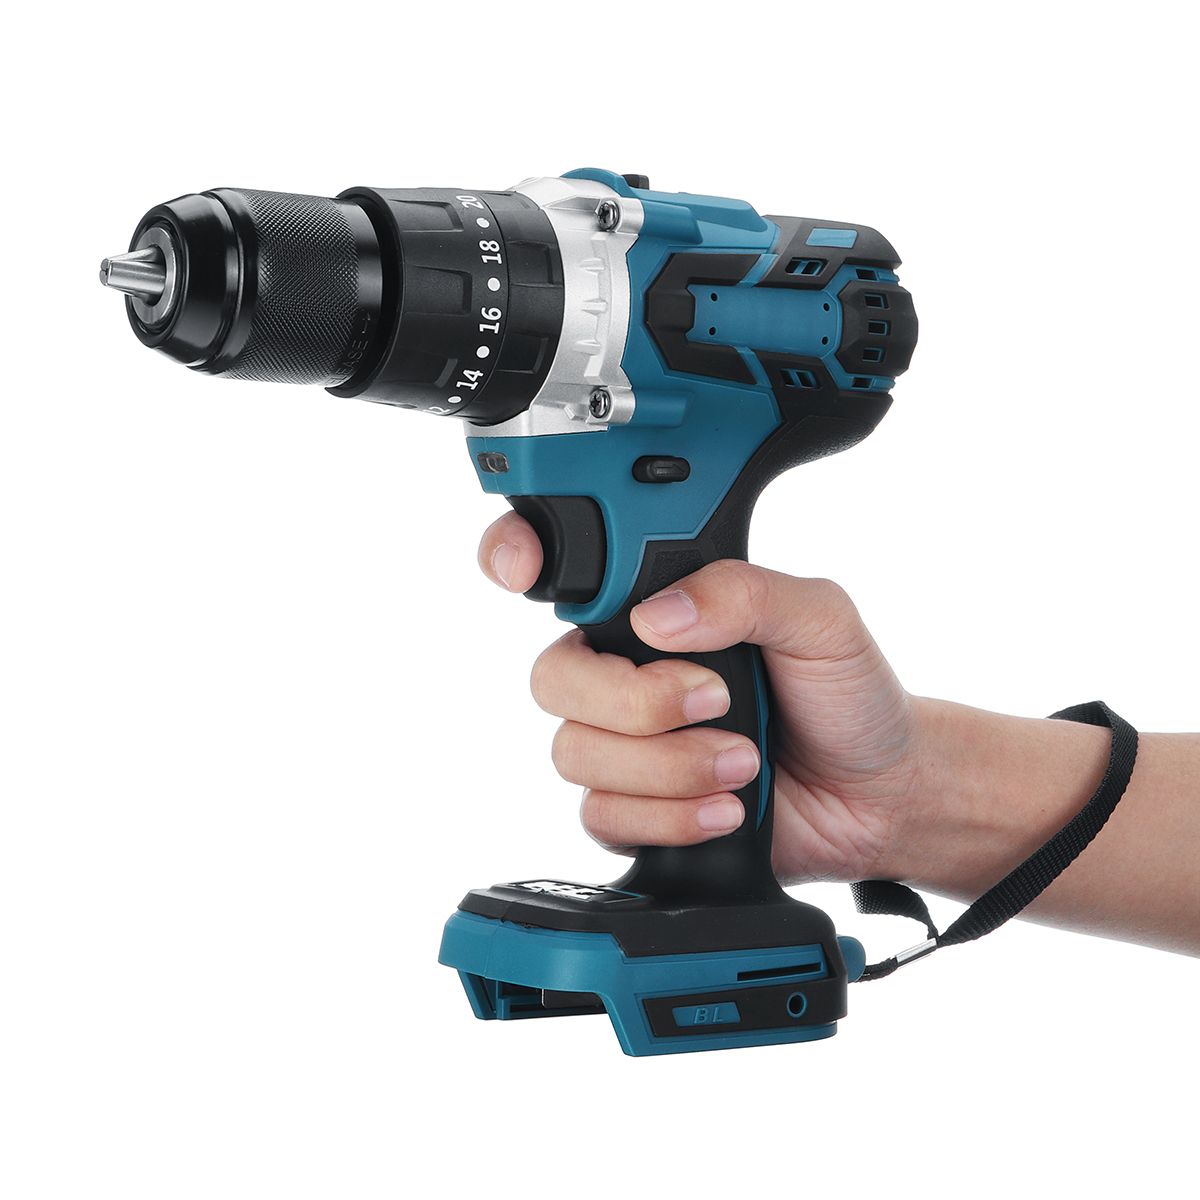 150Nm-Brushless-Cordless-Impact-Drill-3-in-1-1500RPM-Electric-Hammer-Drill-Screwdriver-with-LED-Work-1652355